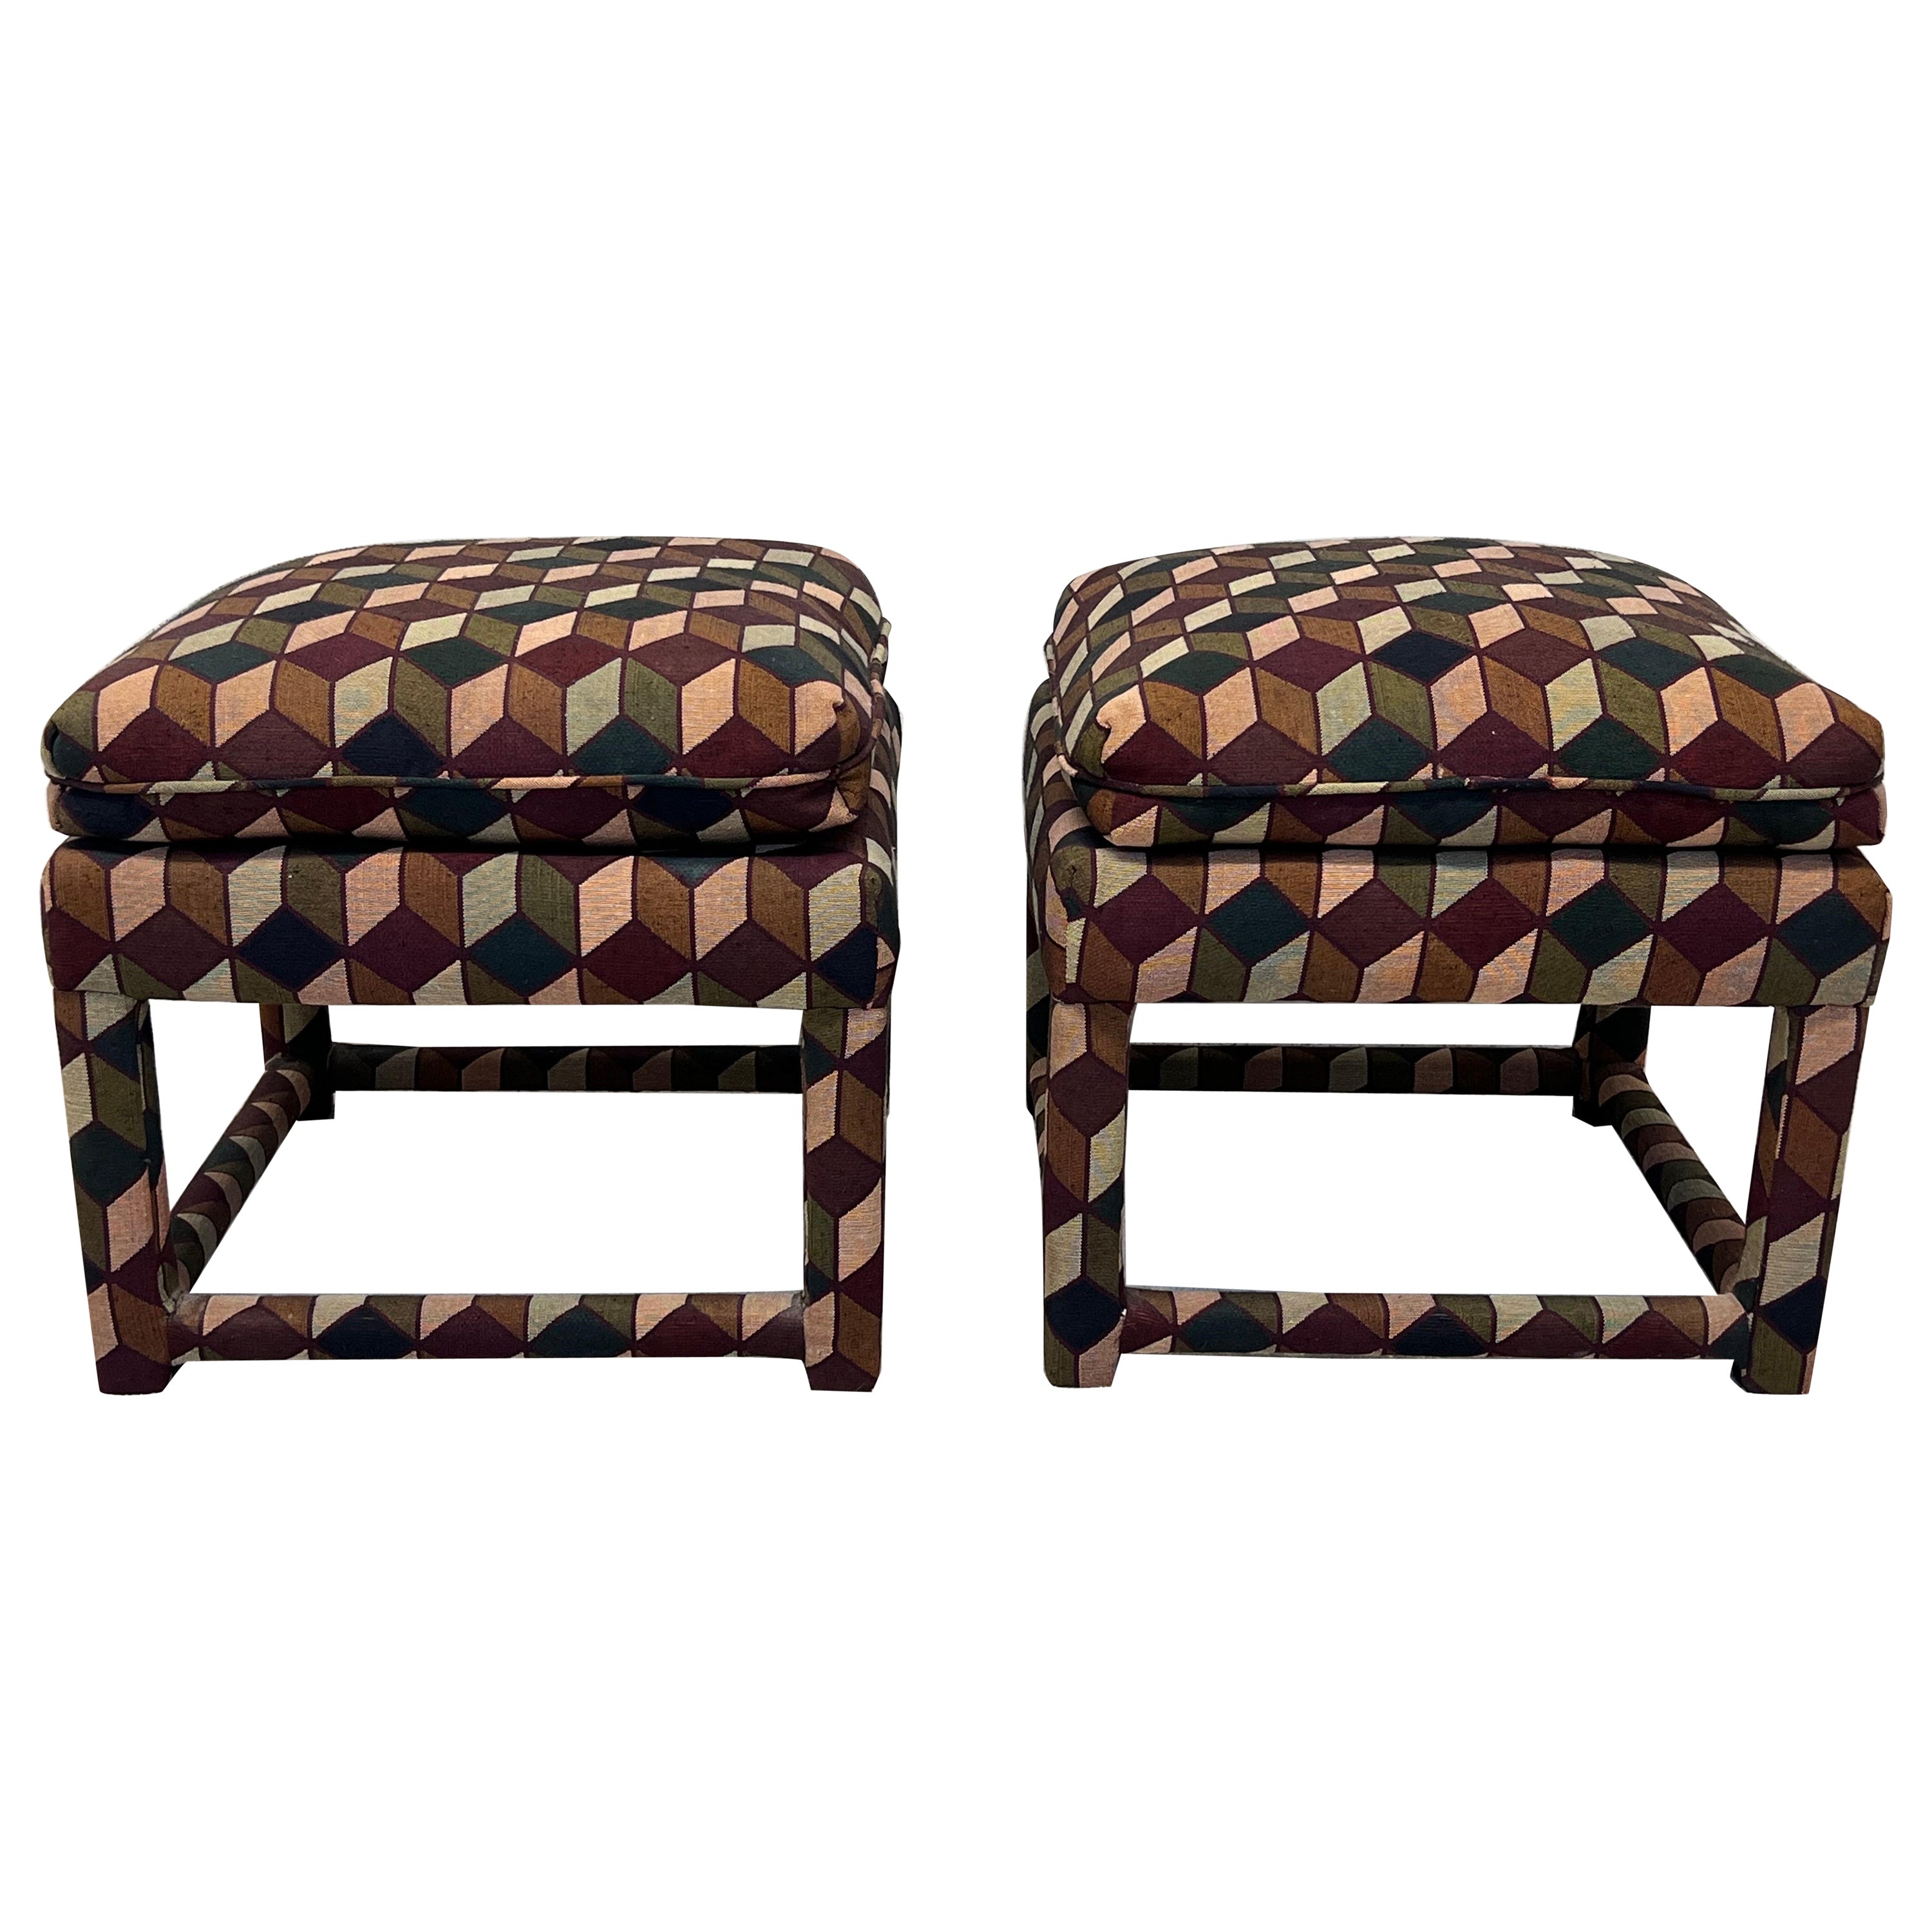 Mid-Century Stools with Tumbling Block Pattern Fabric and Down Cushions, a Pair